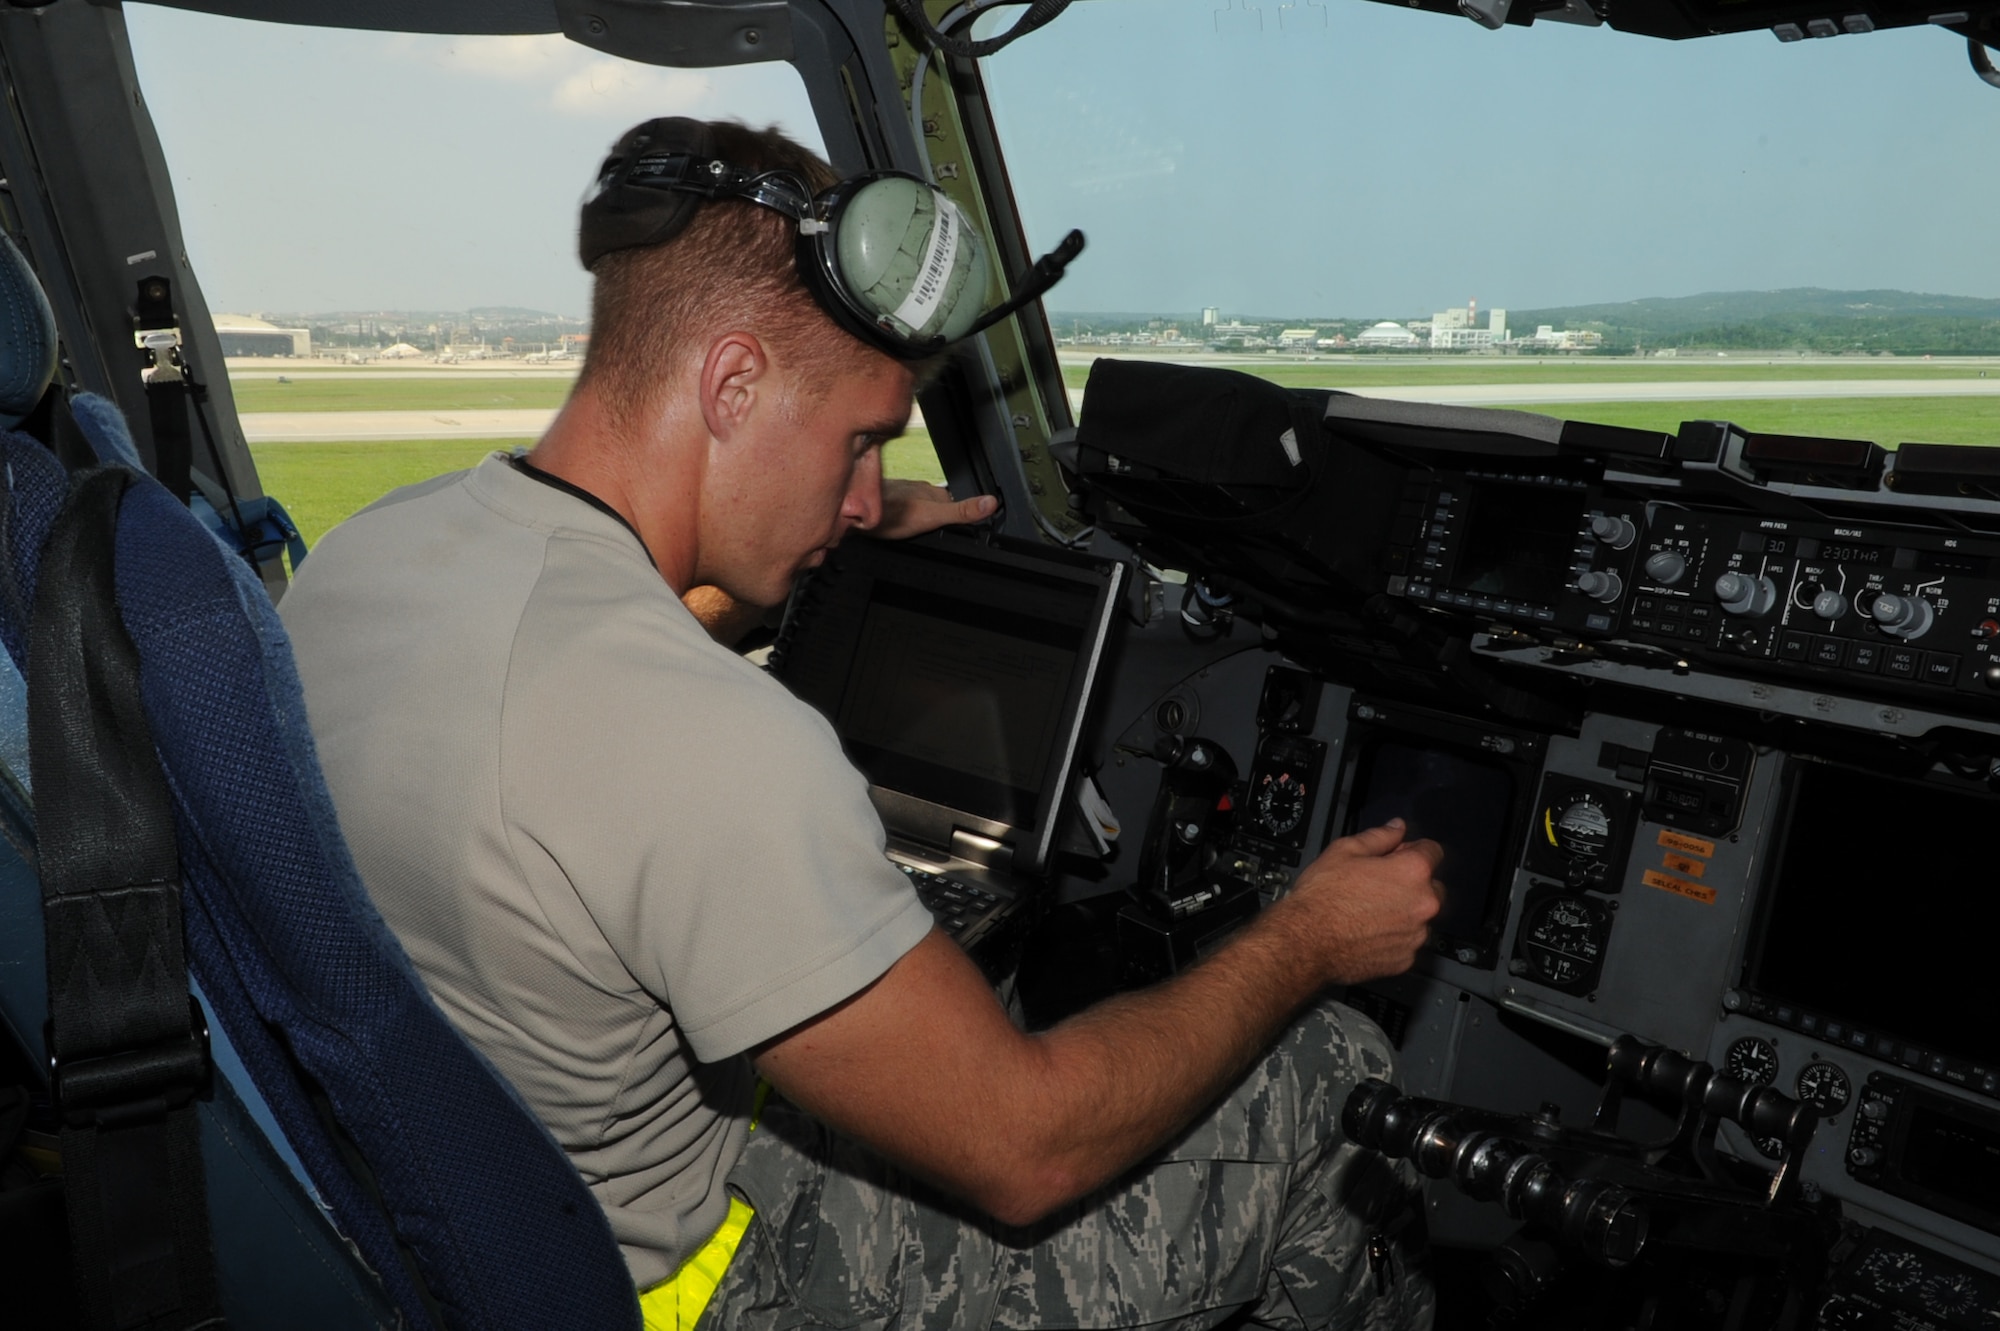 U.S. Air Force Staff Sgt. Nicholas Otos, 733rd Air Mobility Squadron avionics technician craftsman, completes the avionics fault checklist for the C-17 Globemaster III on Kadena Air Base, Japan, Sept. 9, 2014. The fault checklist is one of the means the 733rd AMS uses to ensure safe operation of the aircraft they maintain. (U.S. Air Force photo by Airman 1st Class Zackary A. Henry)